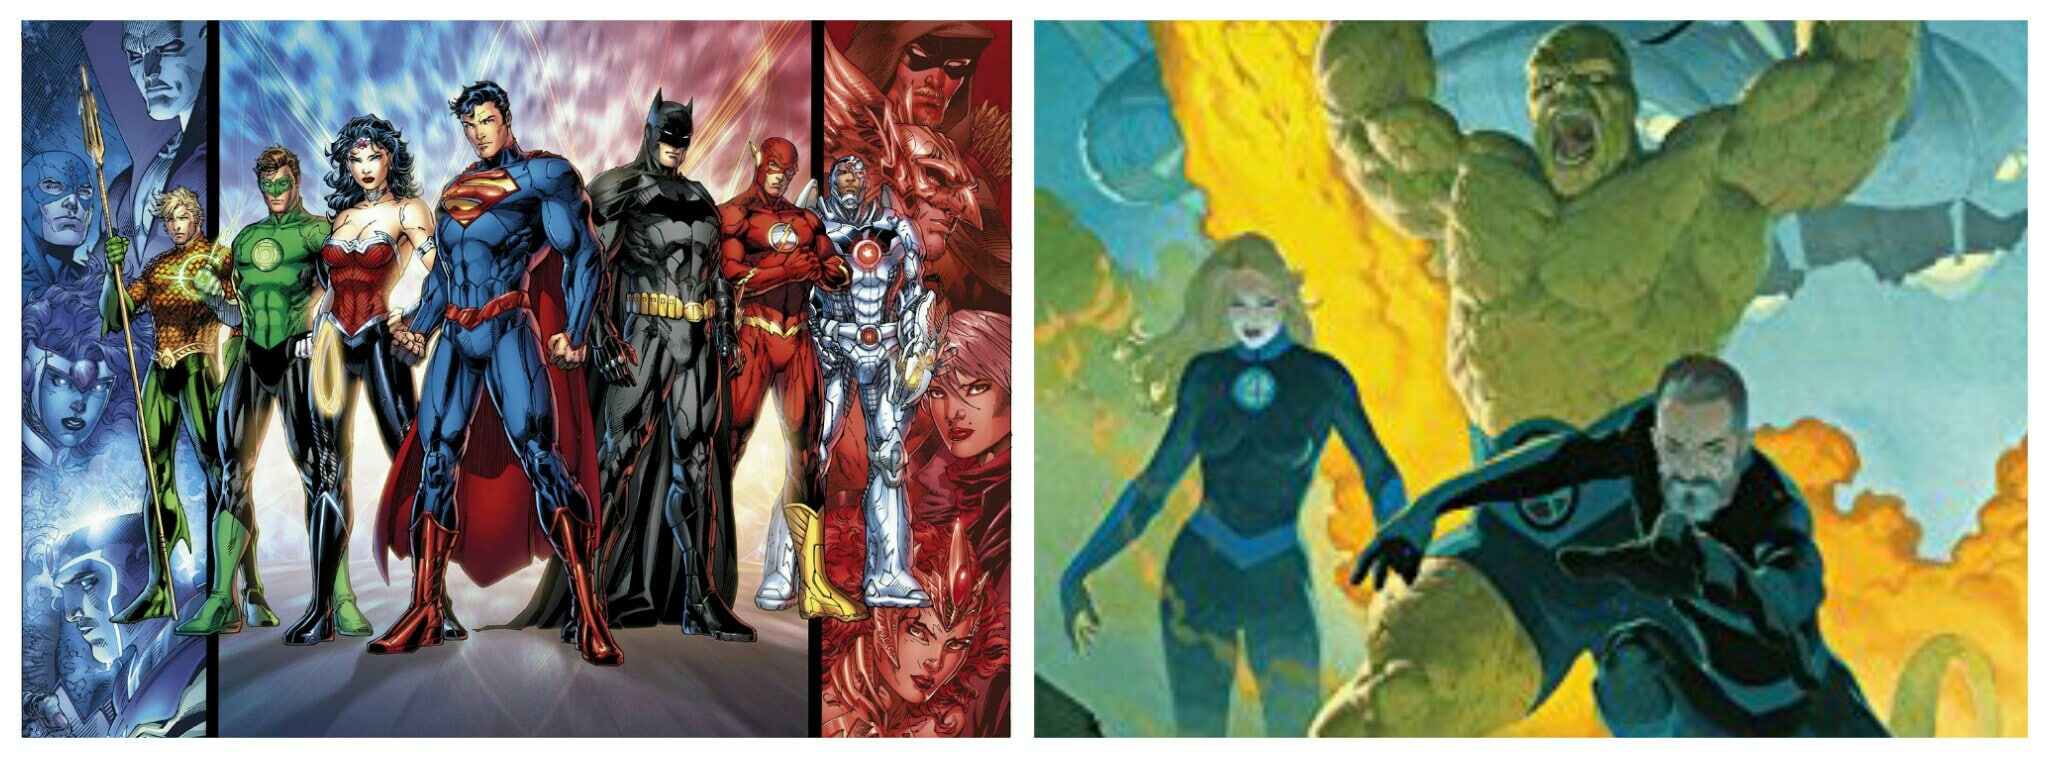 There is no similarity between the Fantastic Four And Justice League movies apart from both being superhero films. 